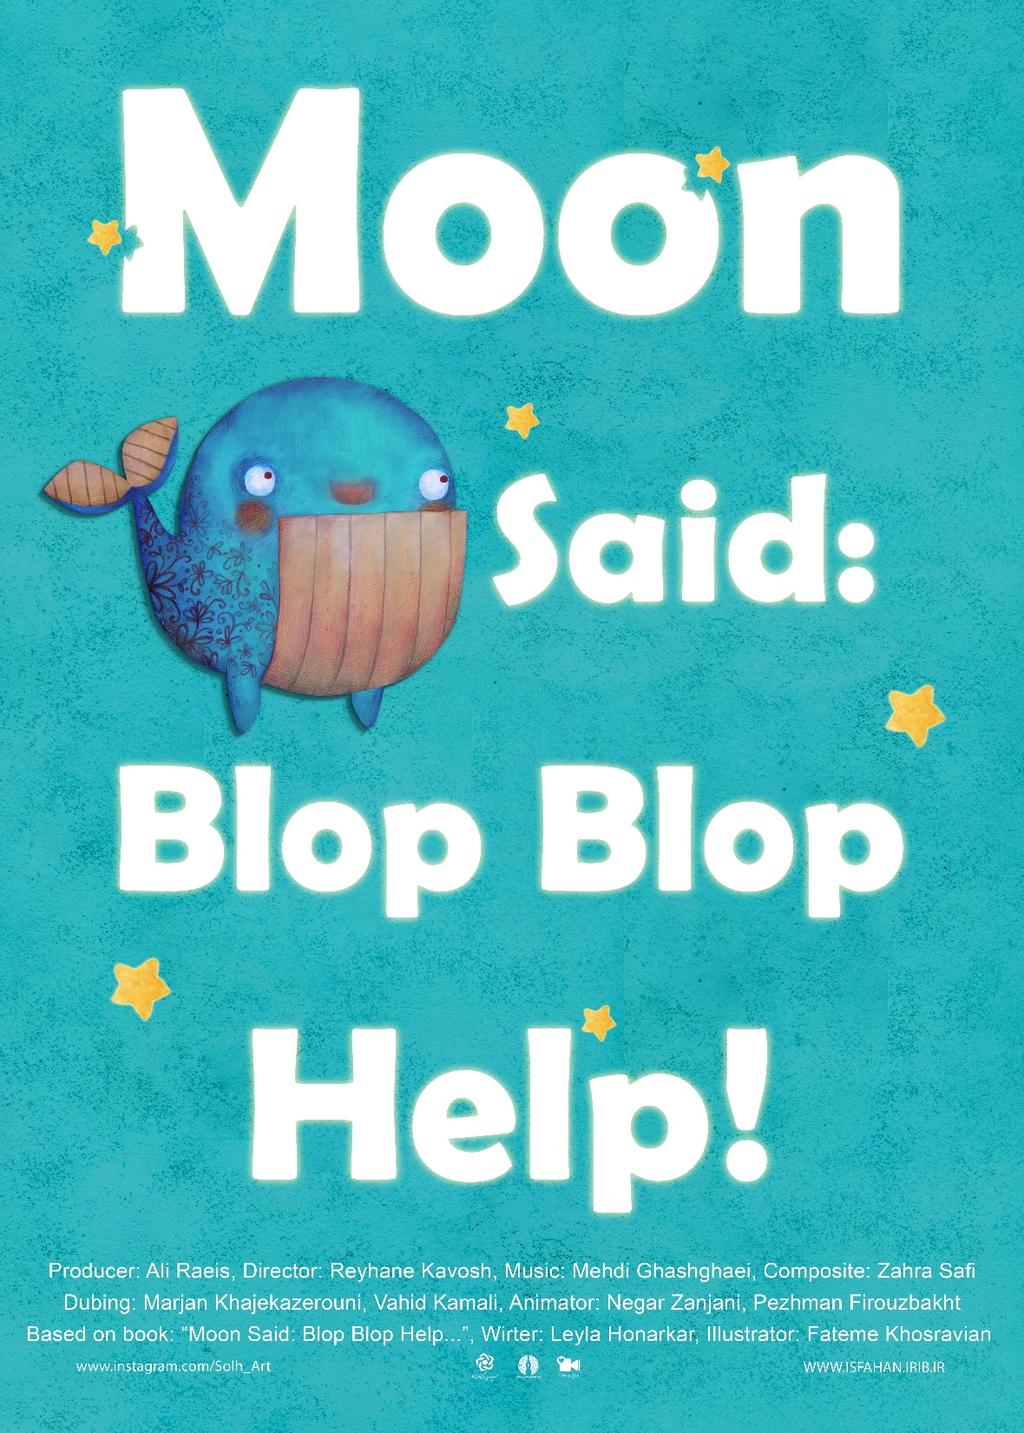 5. Moon Said: Blop Blop Help! Synopsis: A whale is fallen in love with the moon. He tries to jump up and upper out of water each and every night, but meeting this wish is impossible.